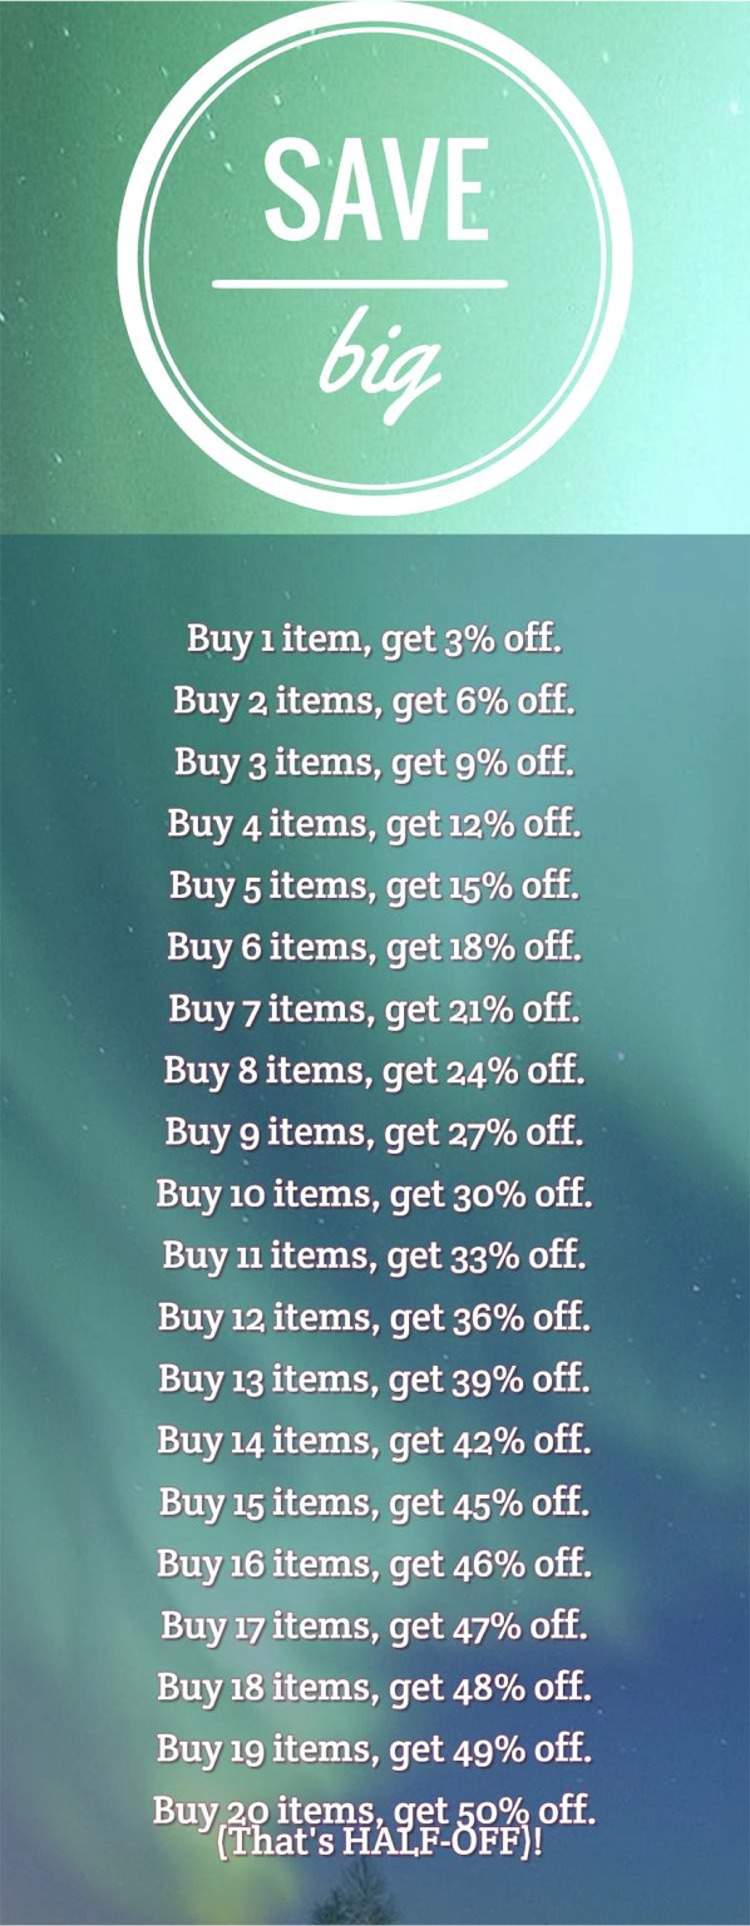 The more you buy, the more you save.